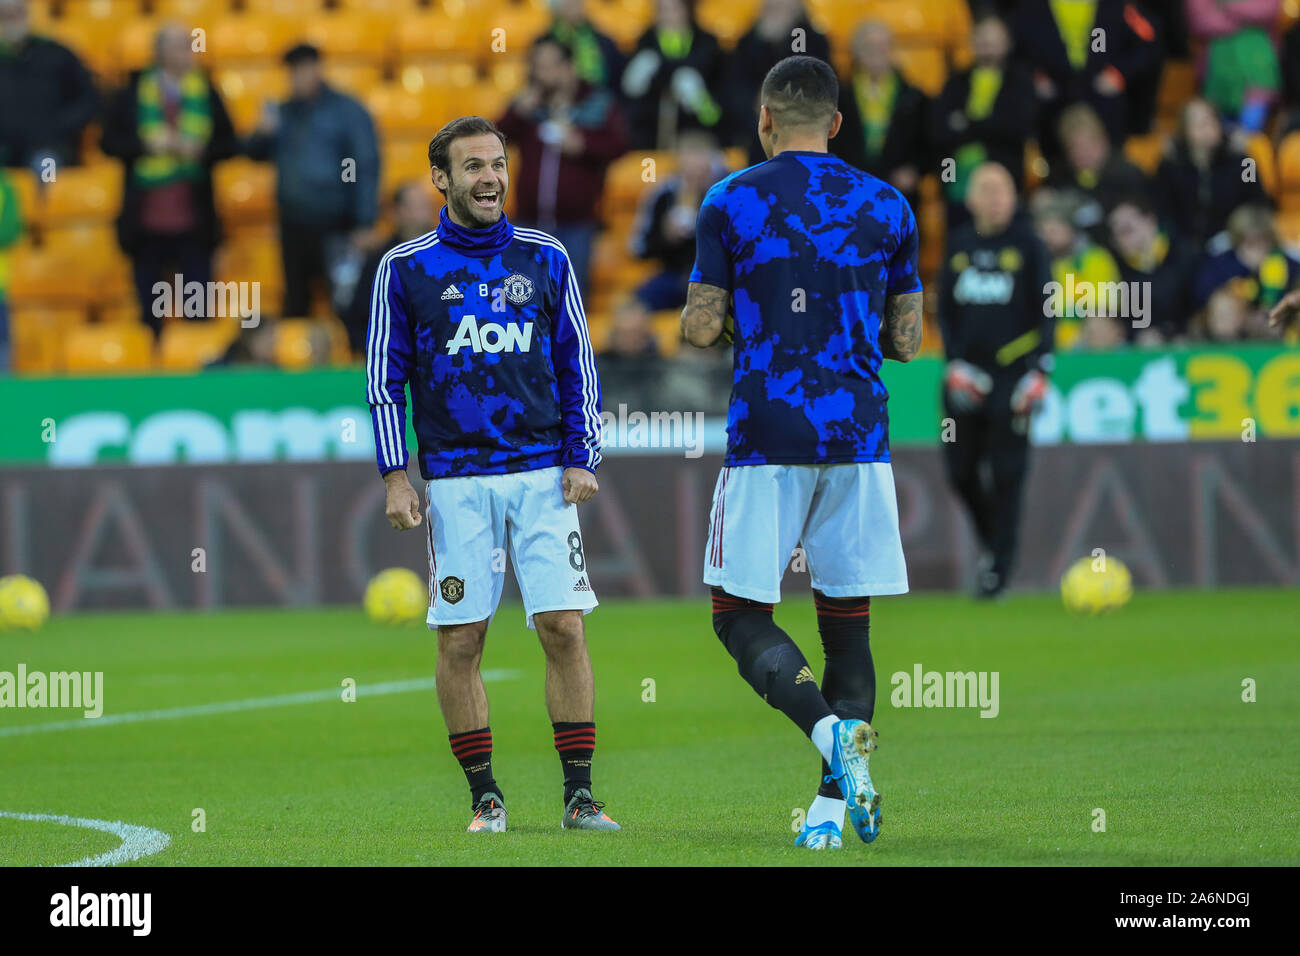 27th October 2019, Carrow Road, Norwich, England; Premier League, Norwich City v Manchester United : Juan Mata (8) of Manchester United full of laughter with Marcos Rojo (16) of Manchester United during the warmup session  Credit: Mark Cosgrove/News Images Stock Photo